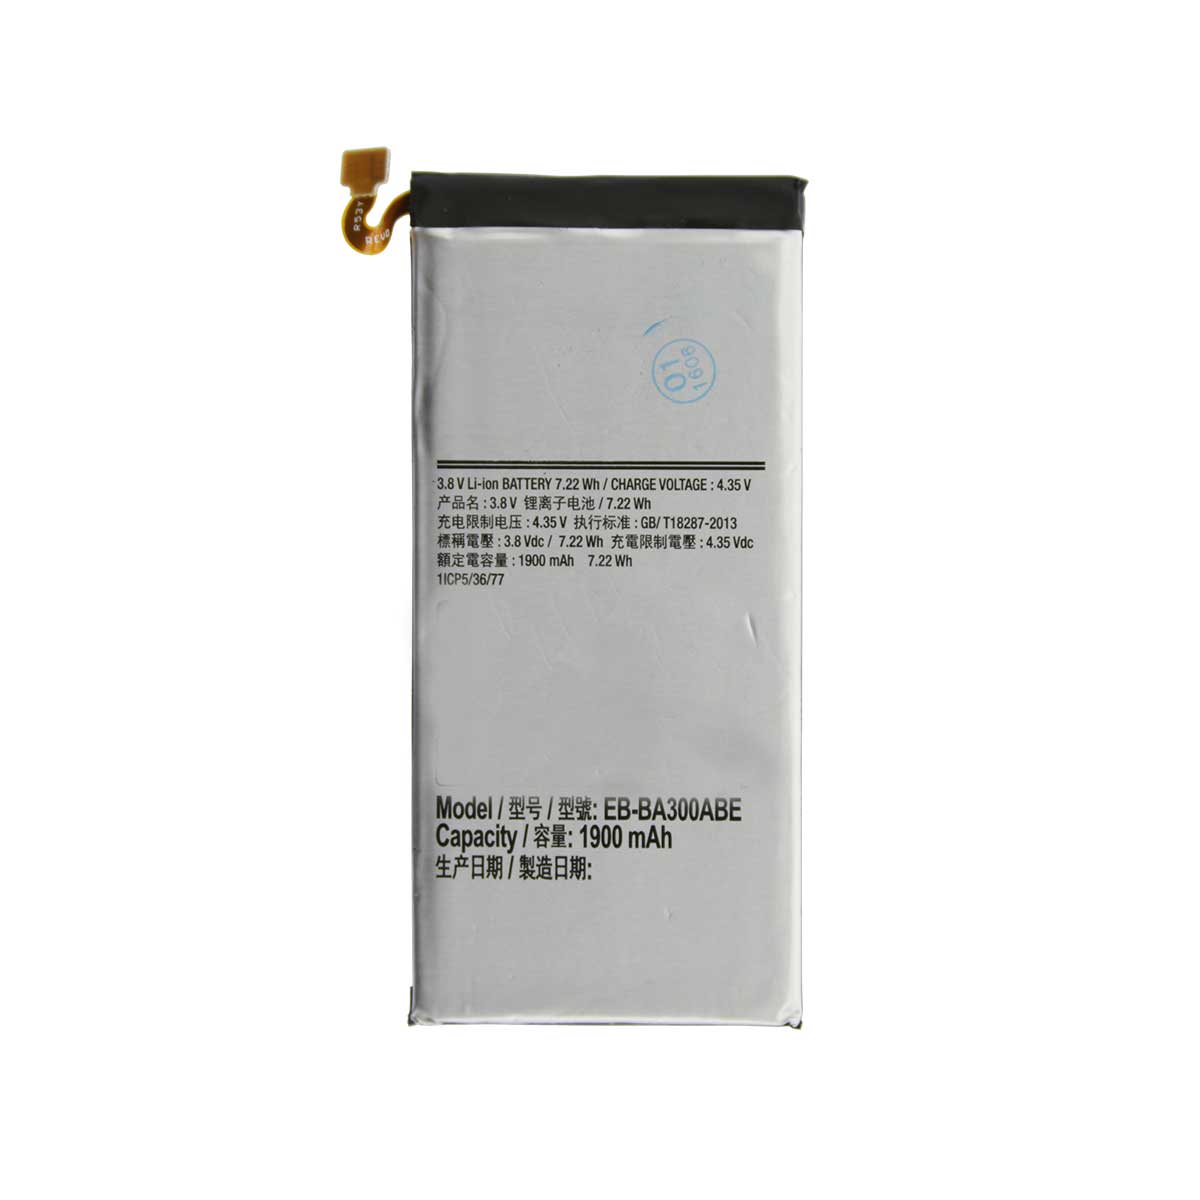 Samsung Galaxy A3 A300 Battery Replacement